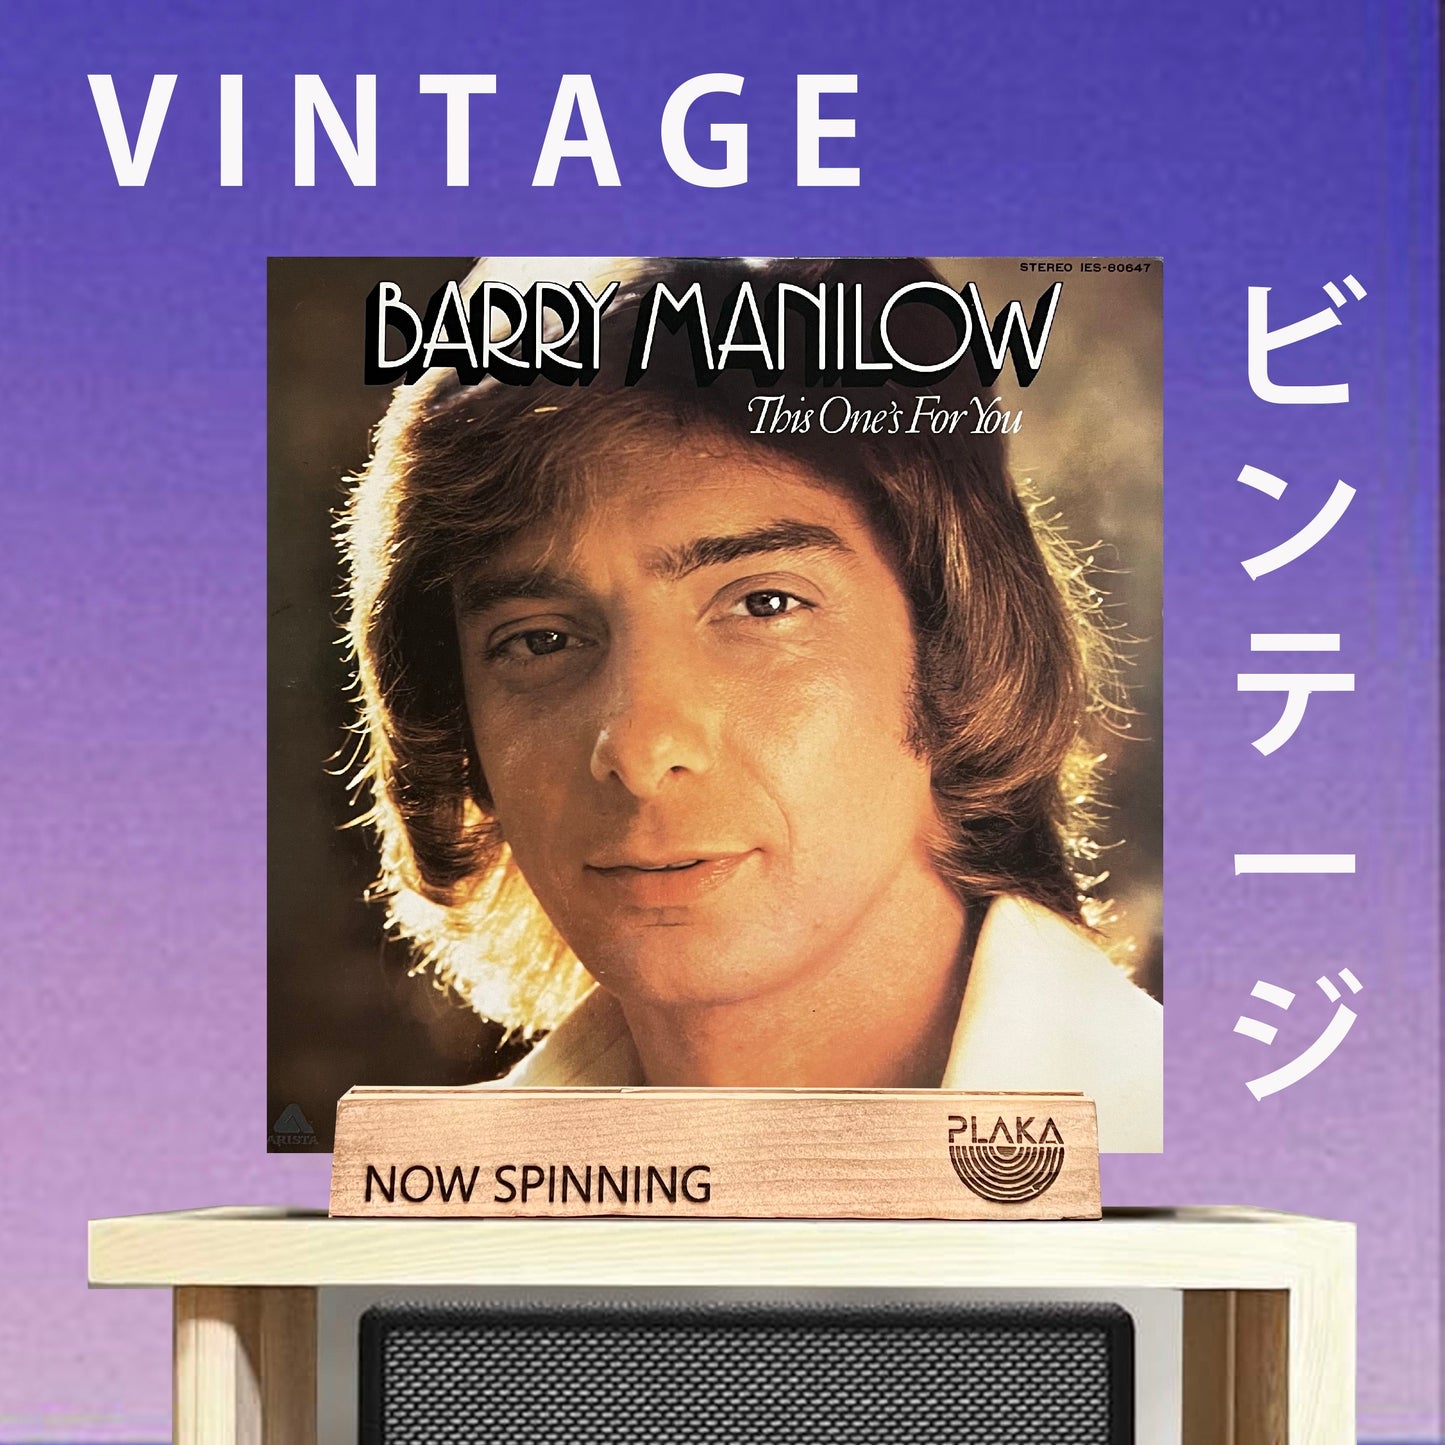 Barry Manilow: This One’s For You